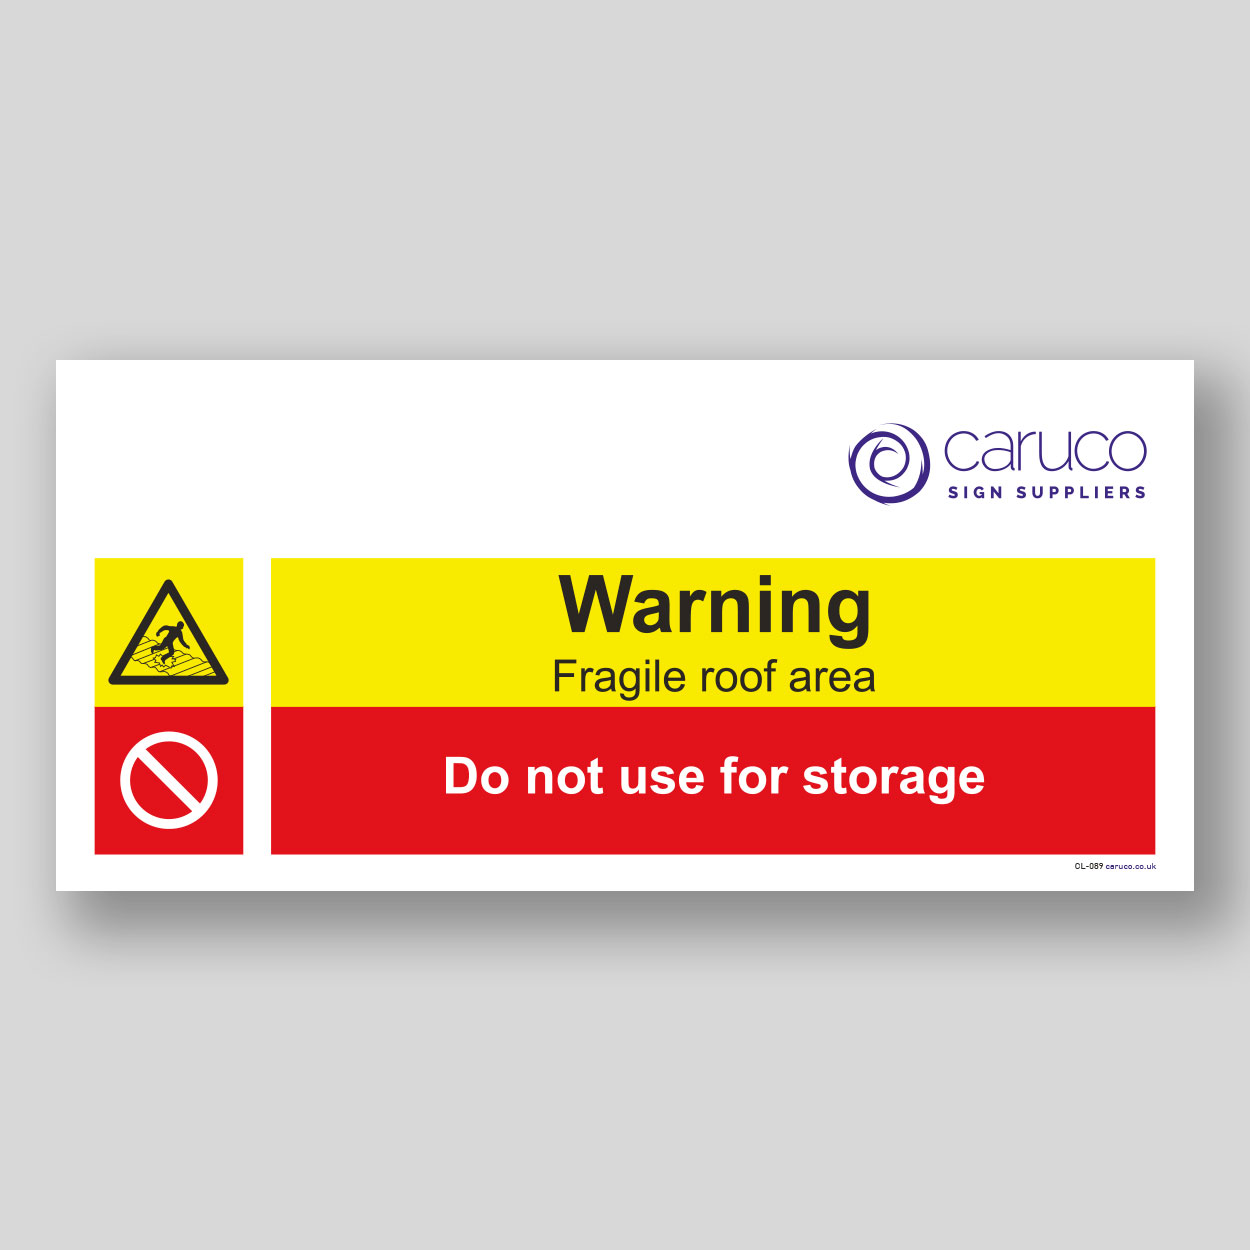 CL-089 Warning fragile roof - do not use